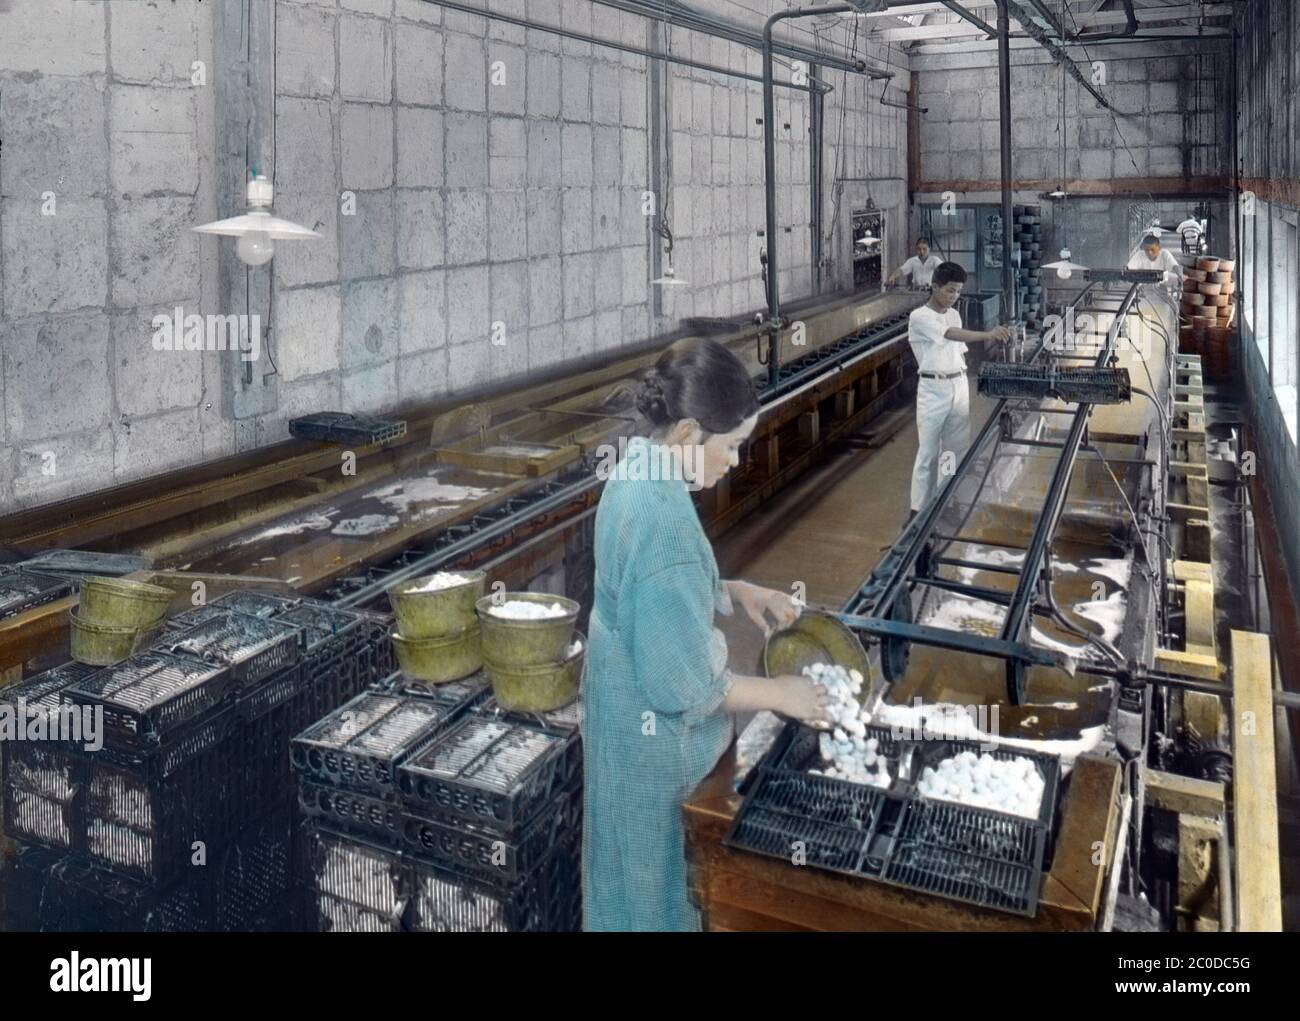 [ 1900s Japan - Japanese Silk Factory ] — Boiling cocoons for reeling silk at a silk factory.  Original title: 656 Boiling the cocoons for spinning  20th century vintage glass slide. Stock Photo